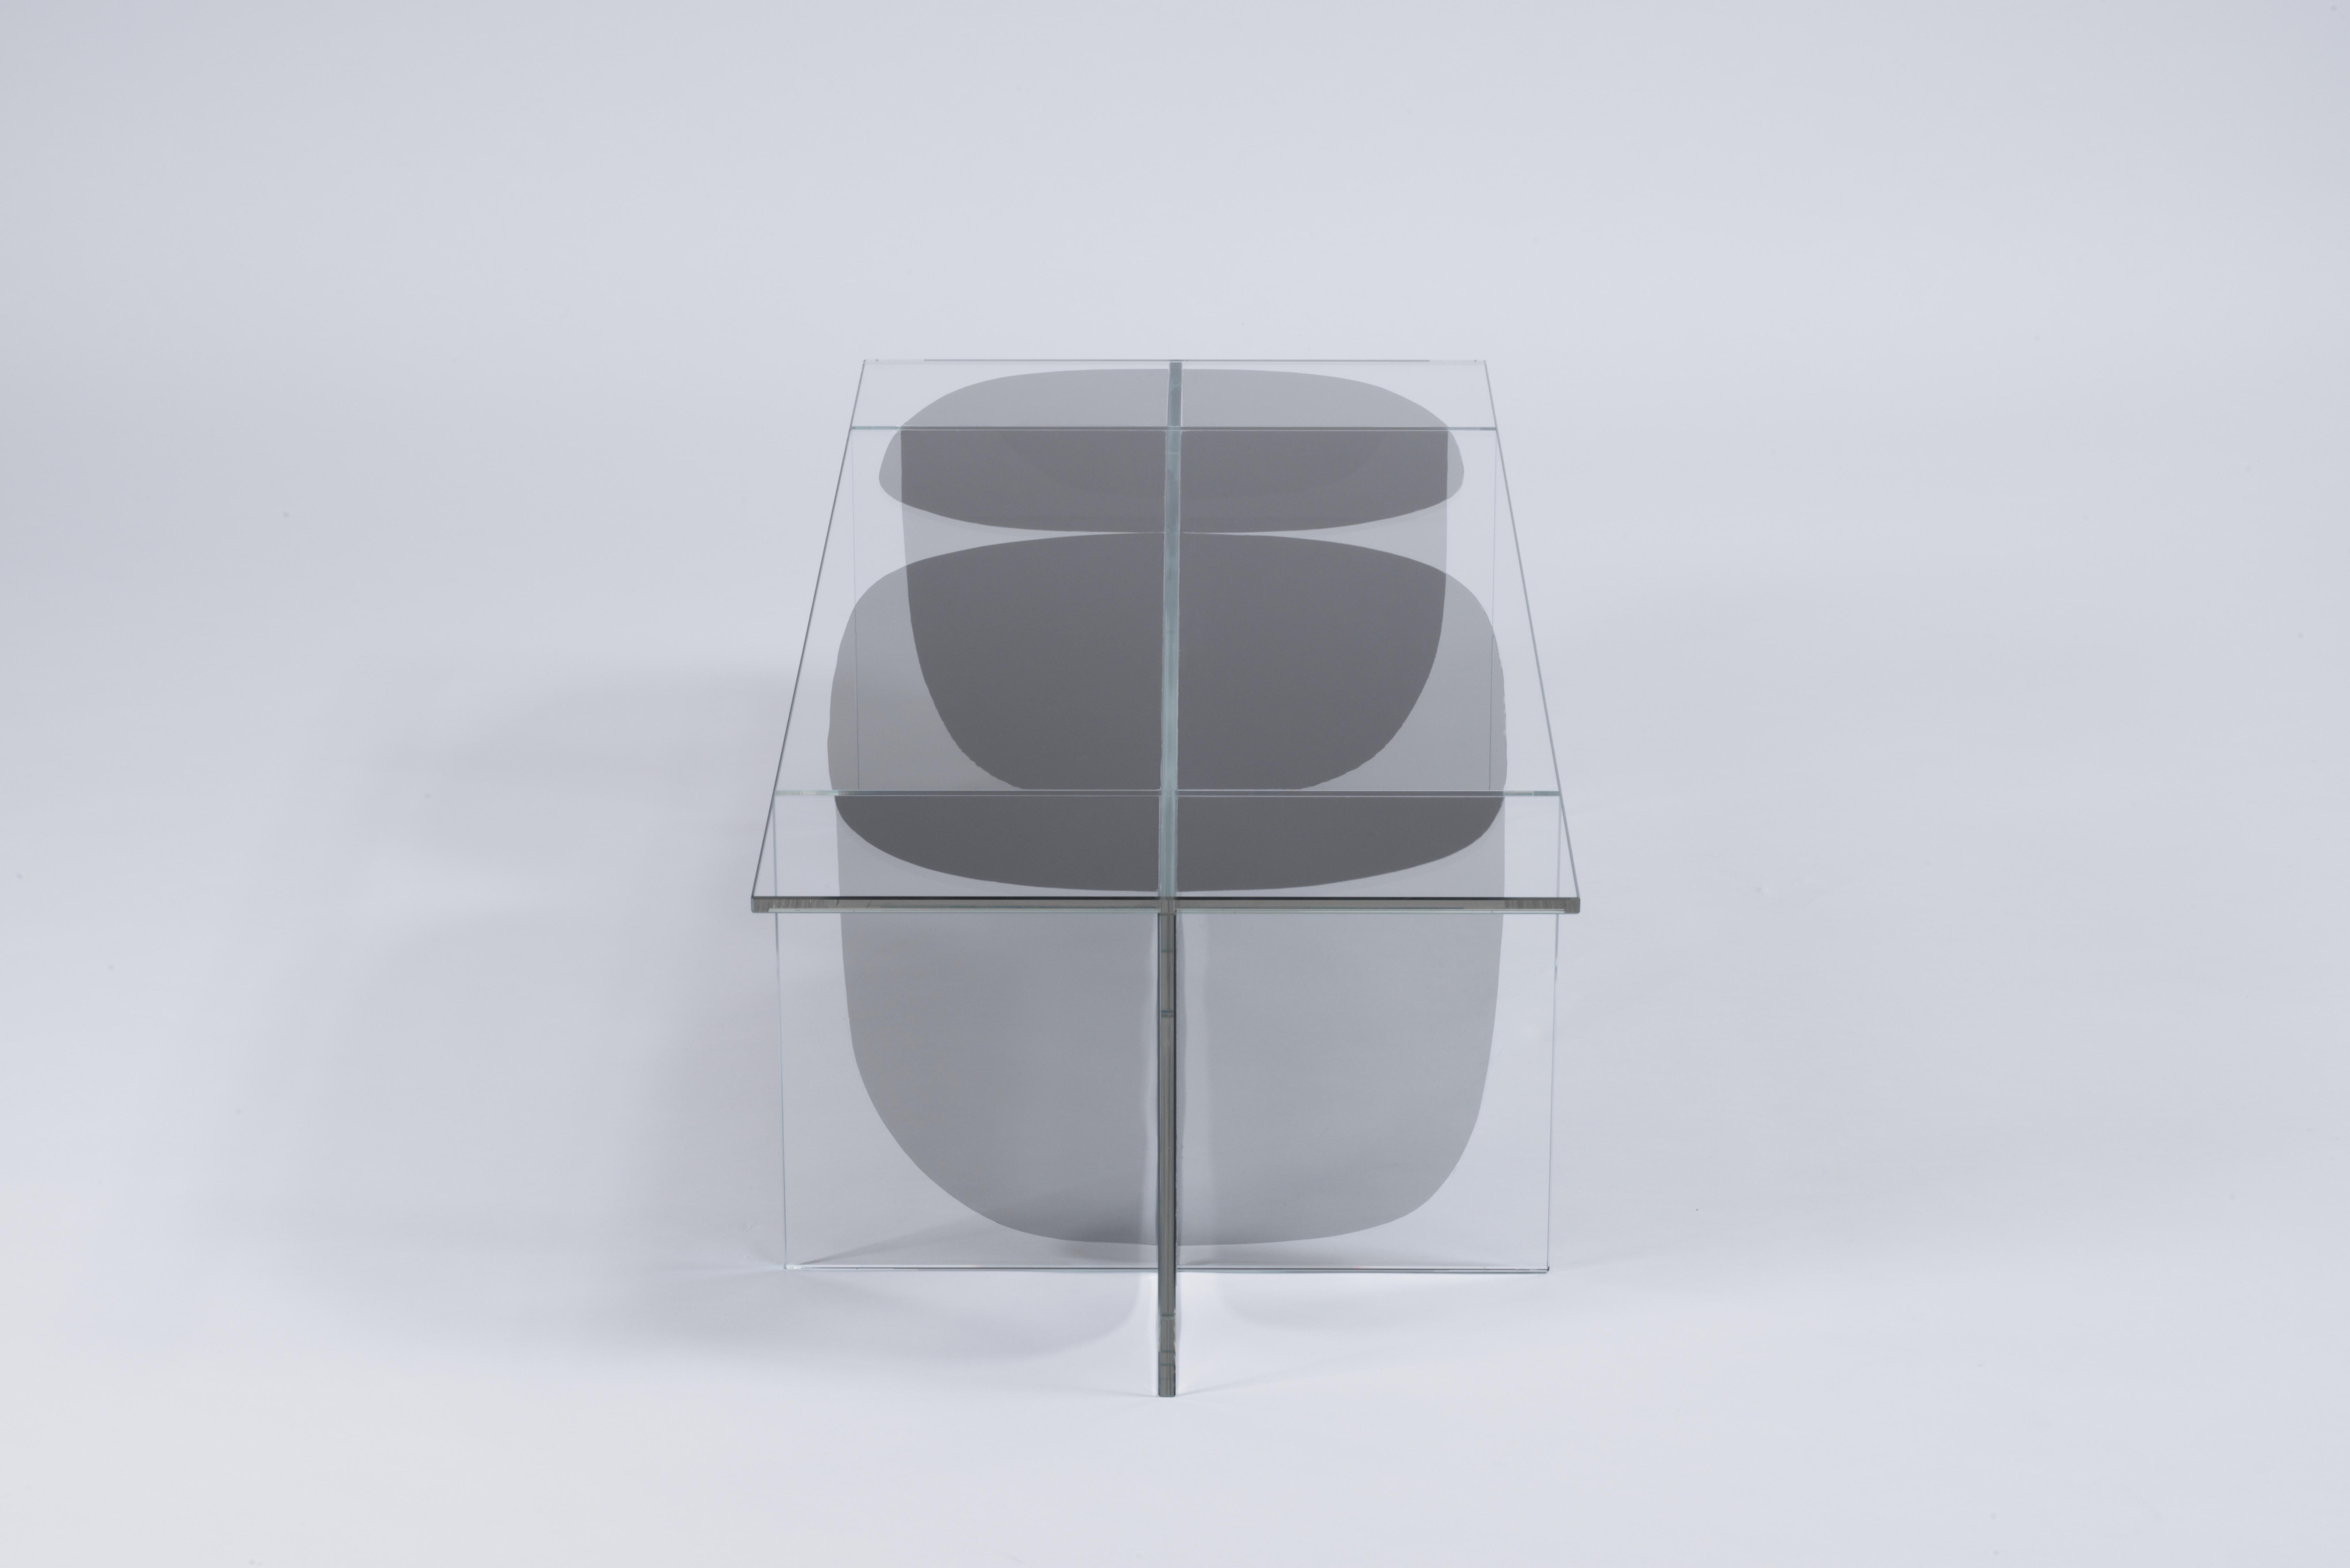 Bipolar coffee table by Oskar Peet and Sophie Mensen

Dimensions: 110 x 45 x 30 cm
Another option: Small version coffee table: 45 x 45 x 46
Materials: glass and flterd laminated
Weight:
Coffee table: 27 kg
Small version coffee table: 13